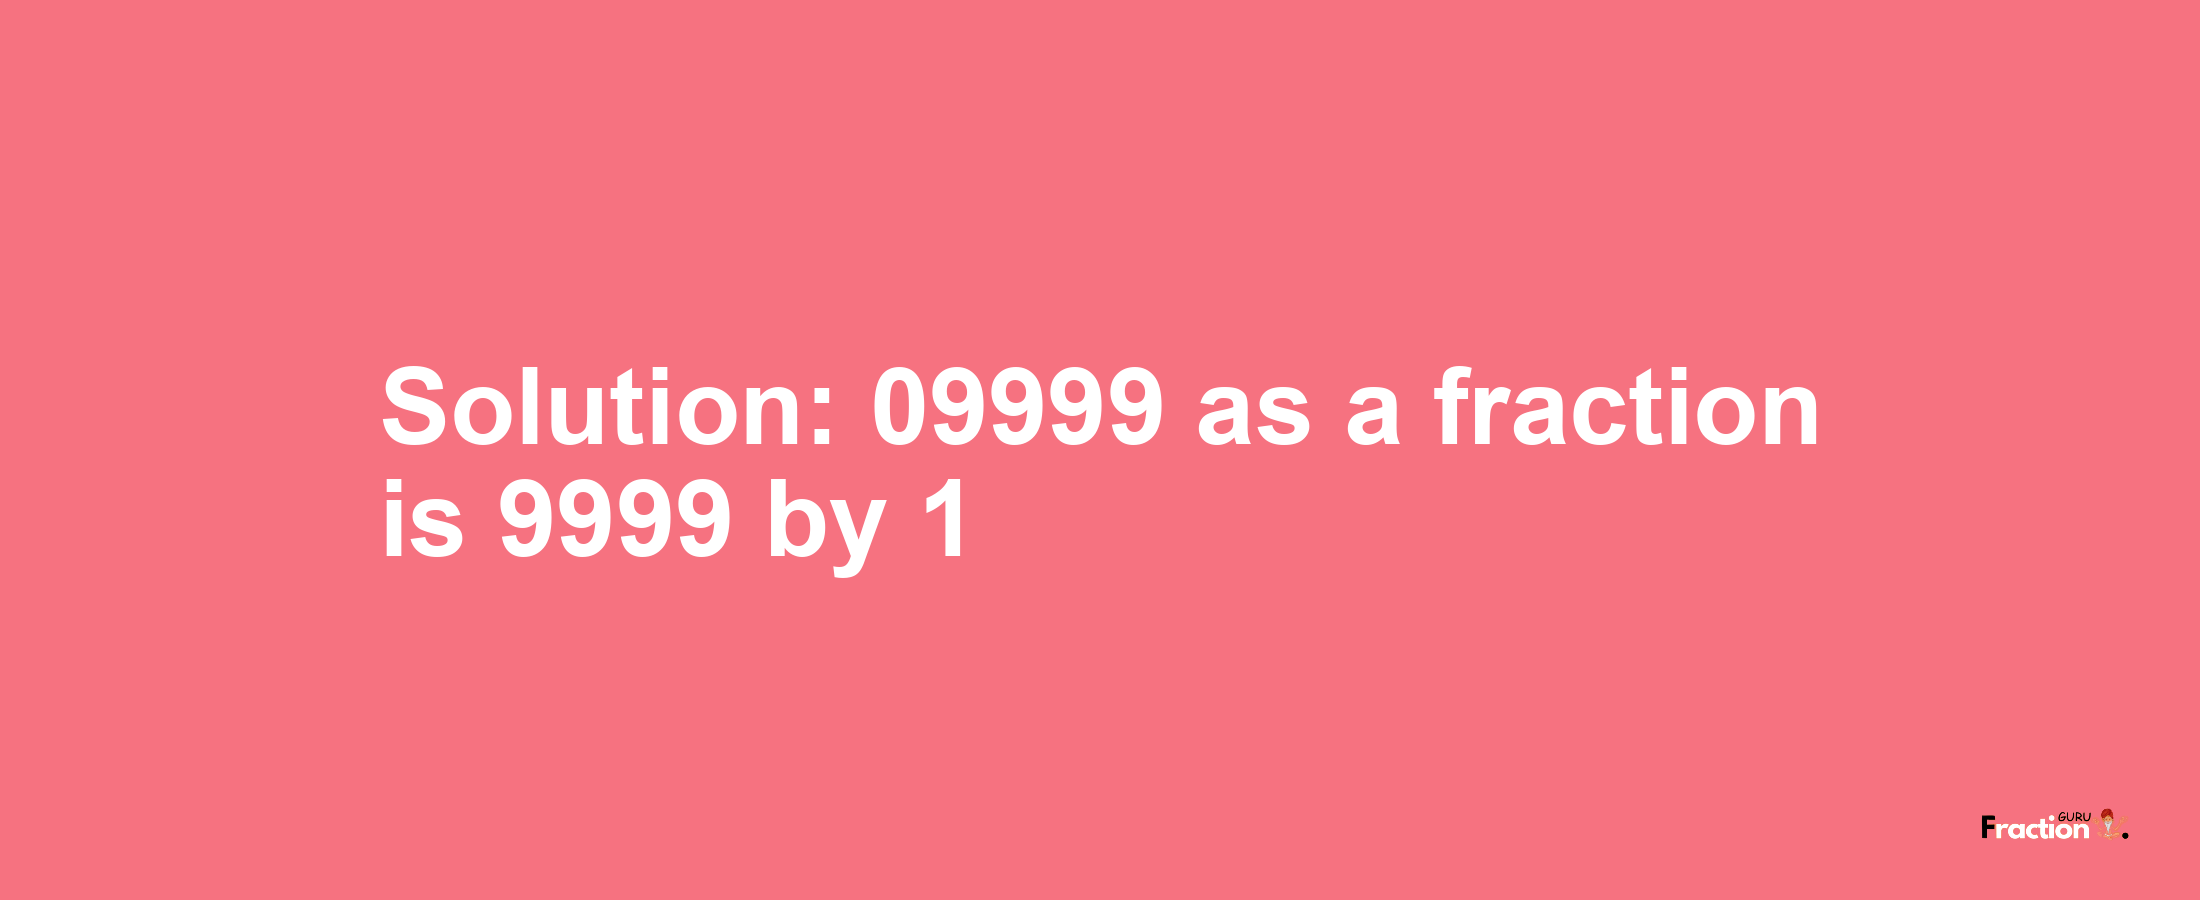 Solution:09999 as a fraction is 9999/1